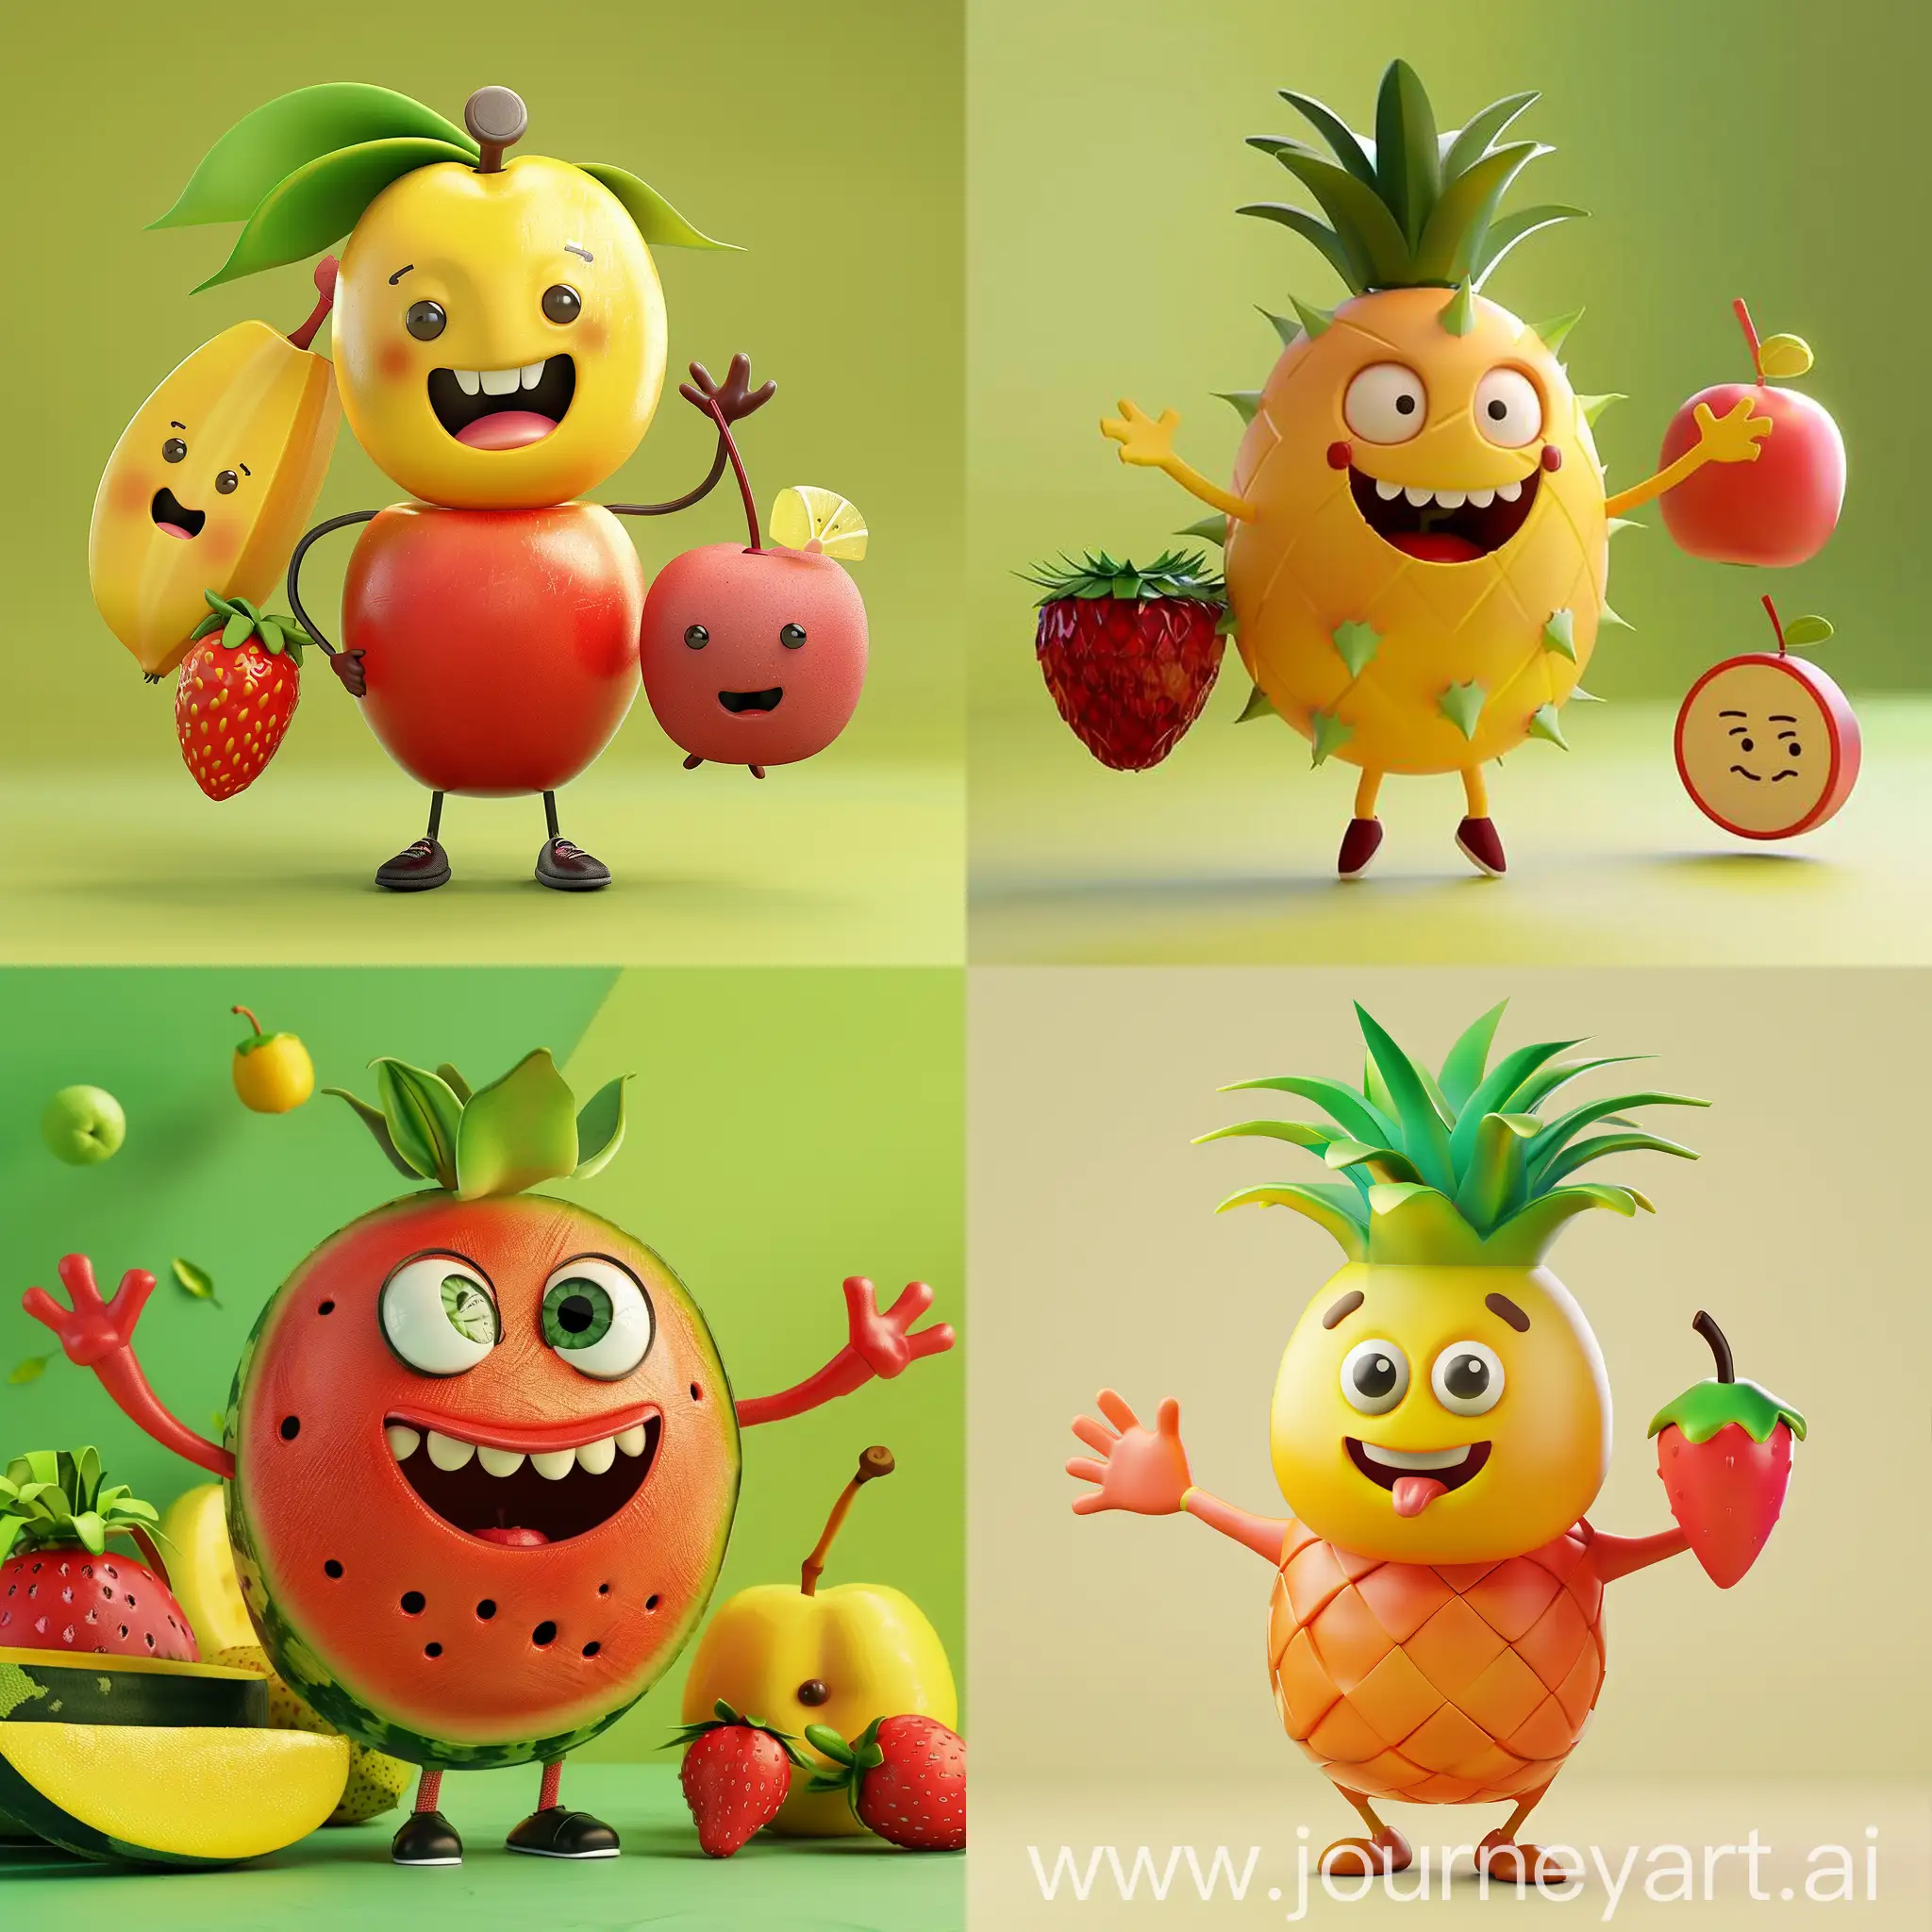 I need a animated fruit 3d character in cartoon style